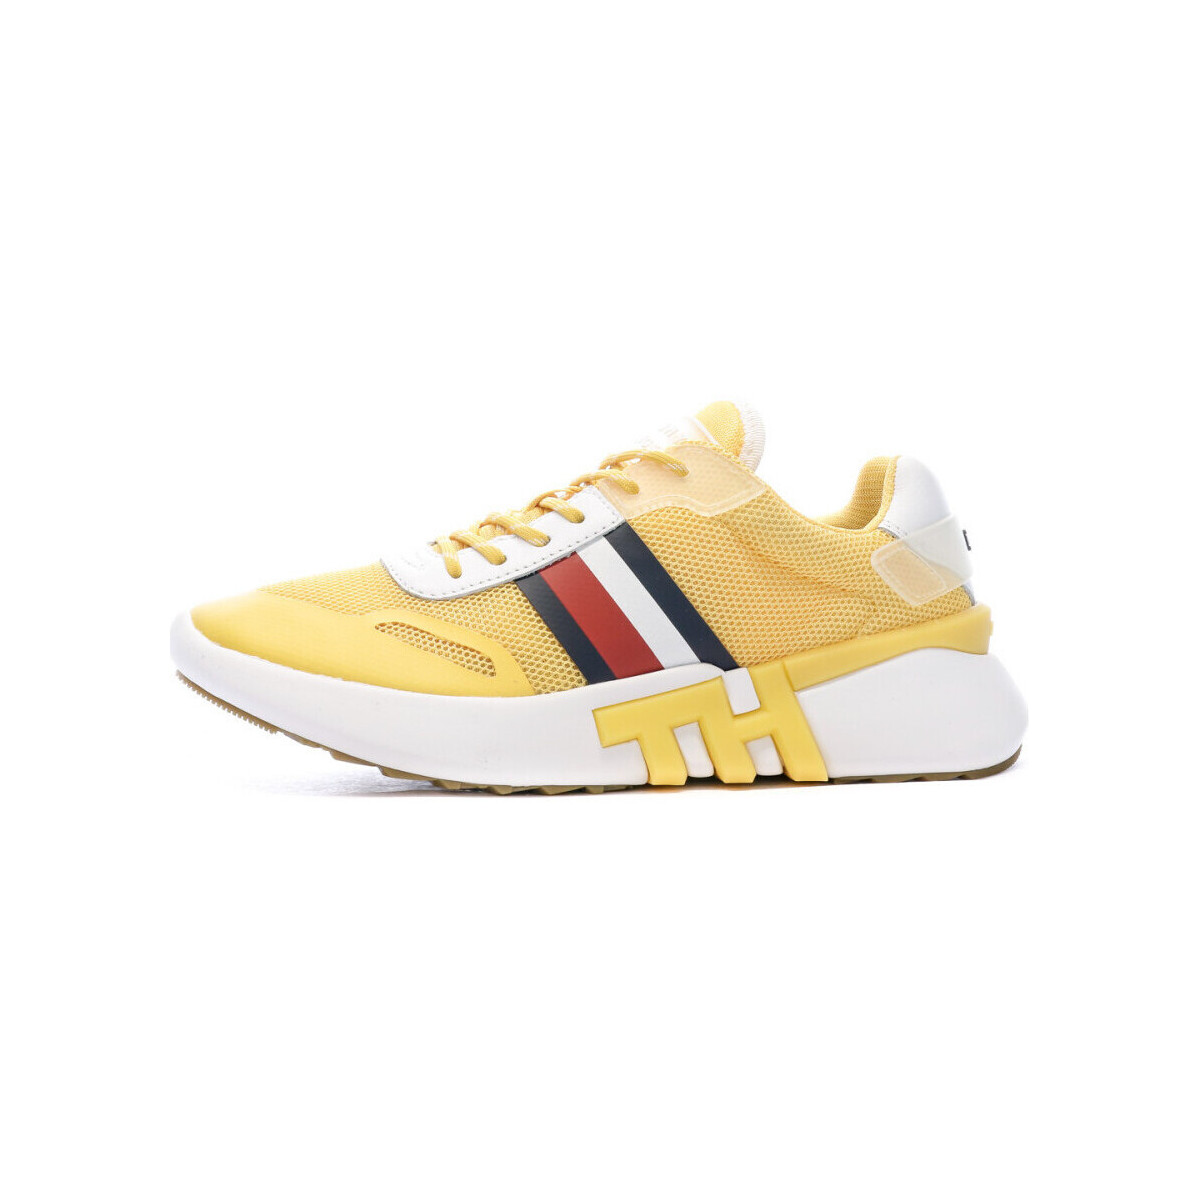 Scarpe Donna Sneakers basse Tommy Hilfiger FW0FW04700 Giallo